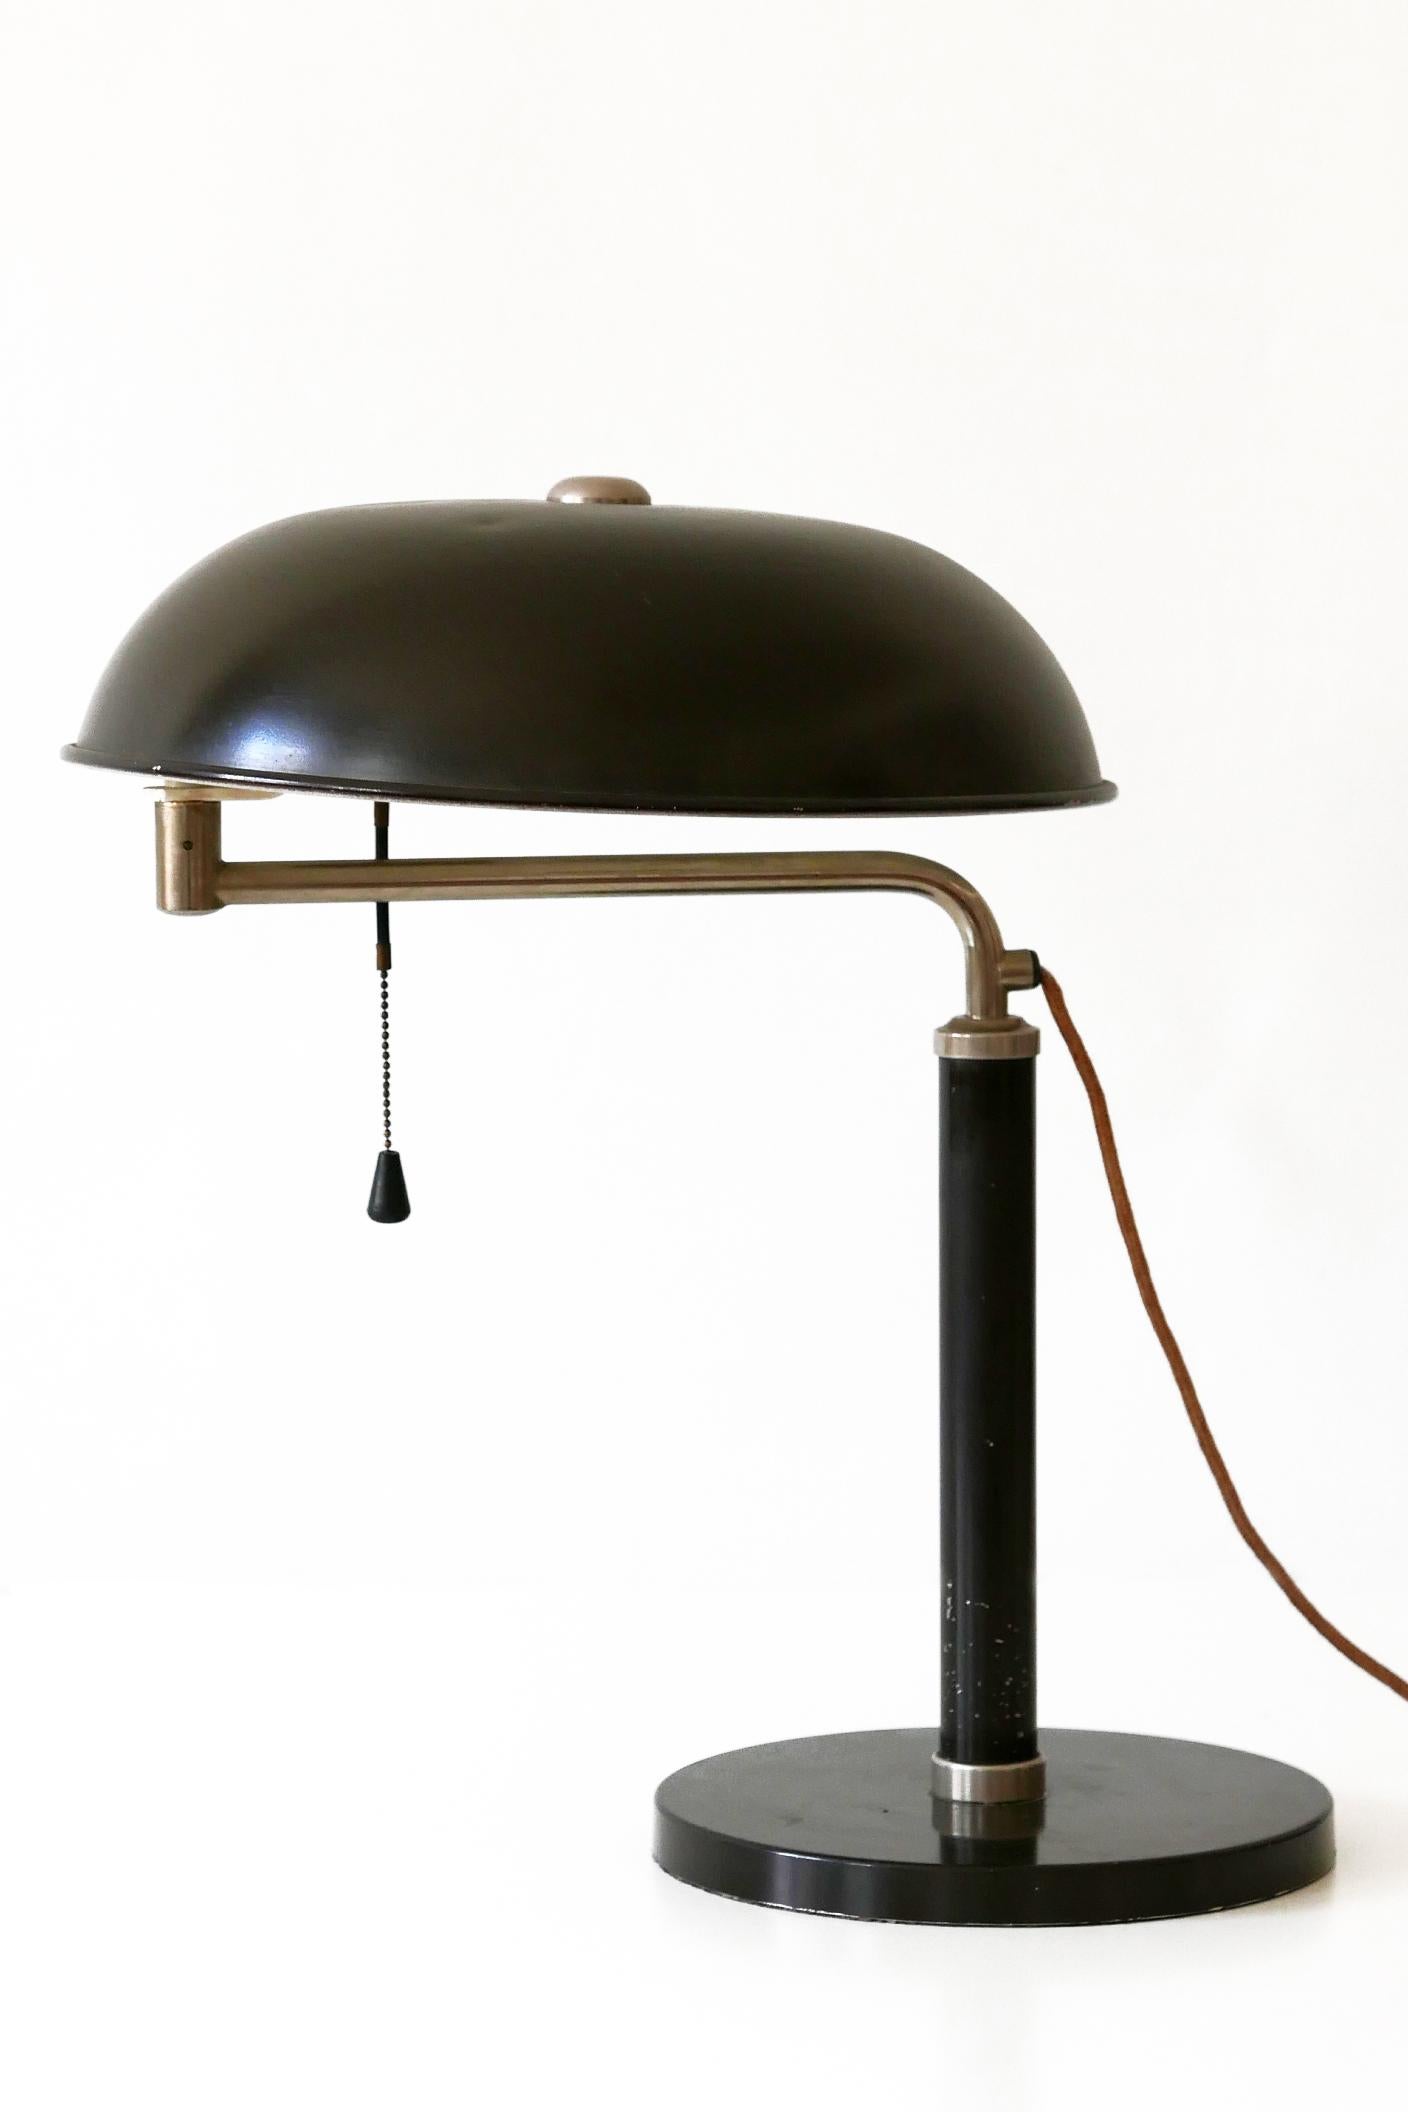 Swiss Articulated Bauhaus Table Lamp Quick 1500 by Alfred Müller for Amba, 1930s